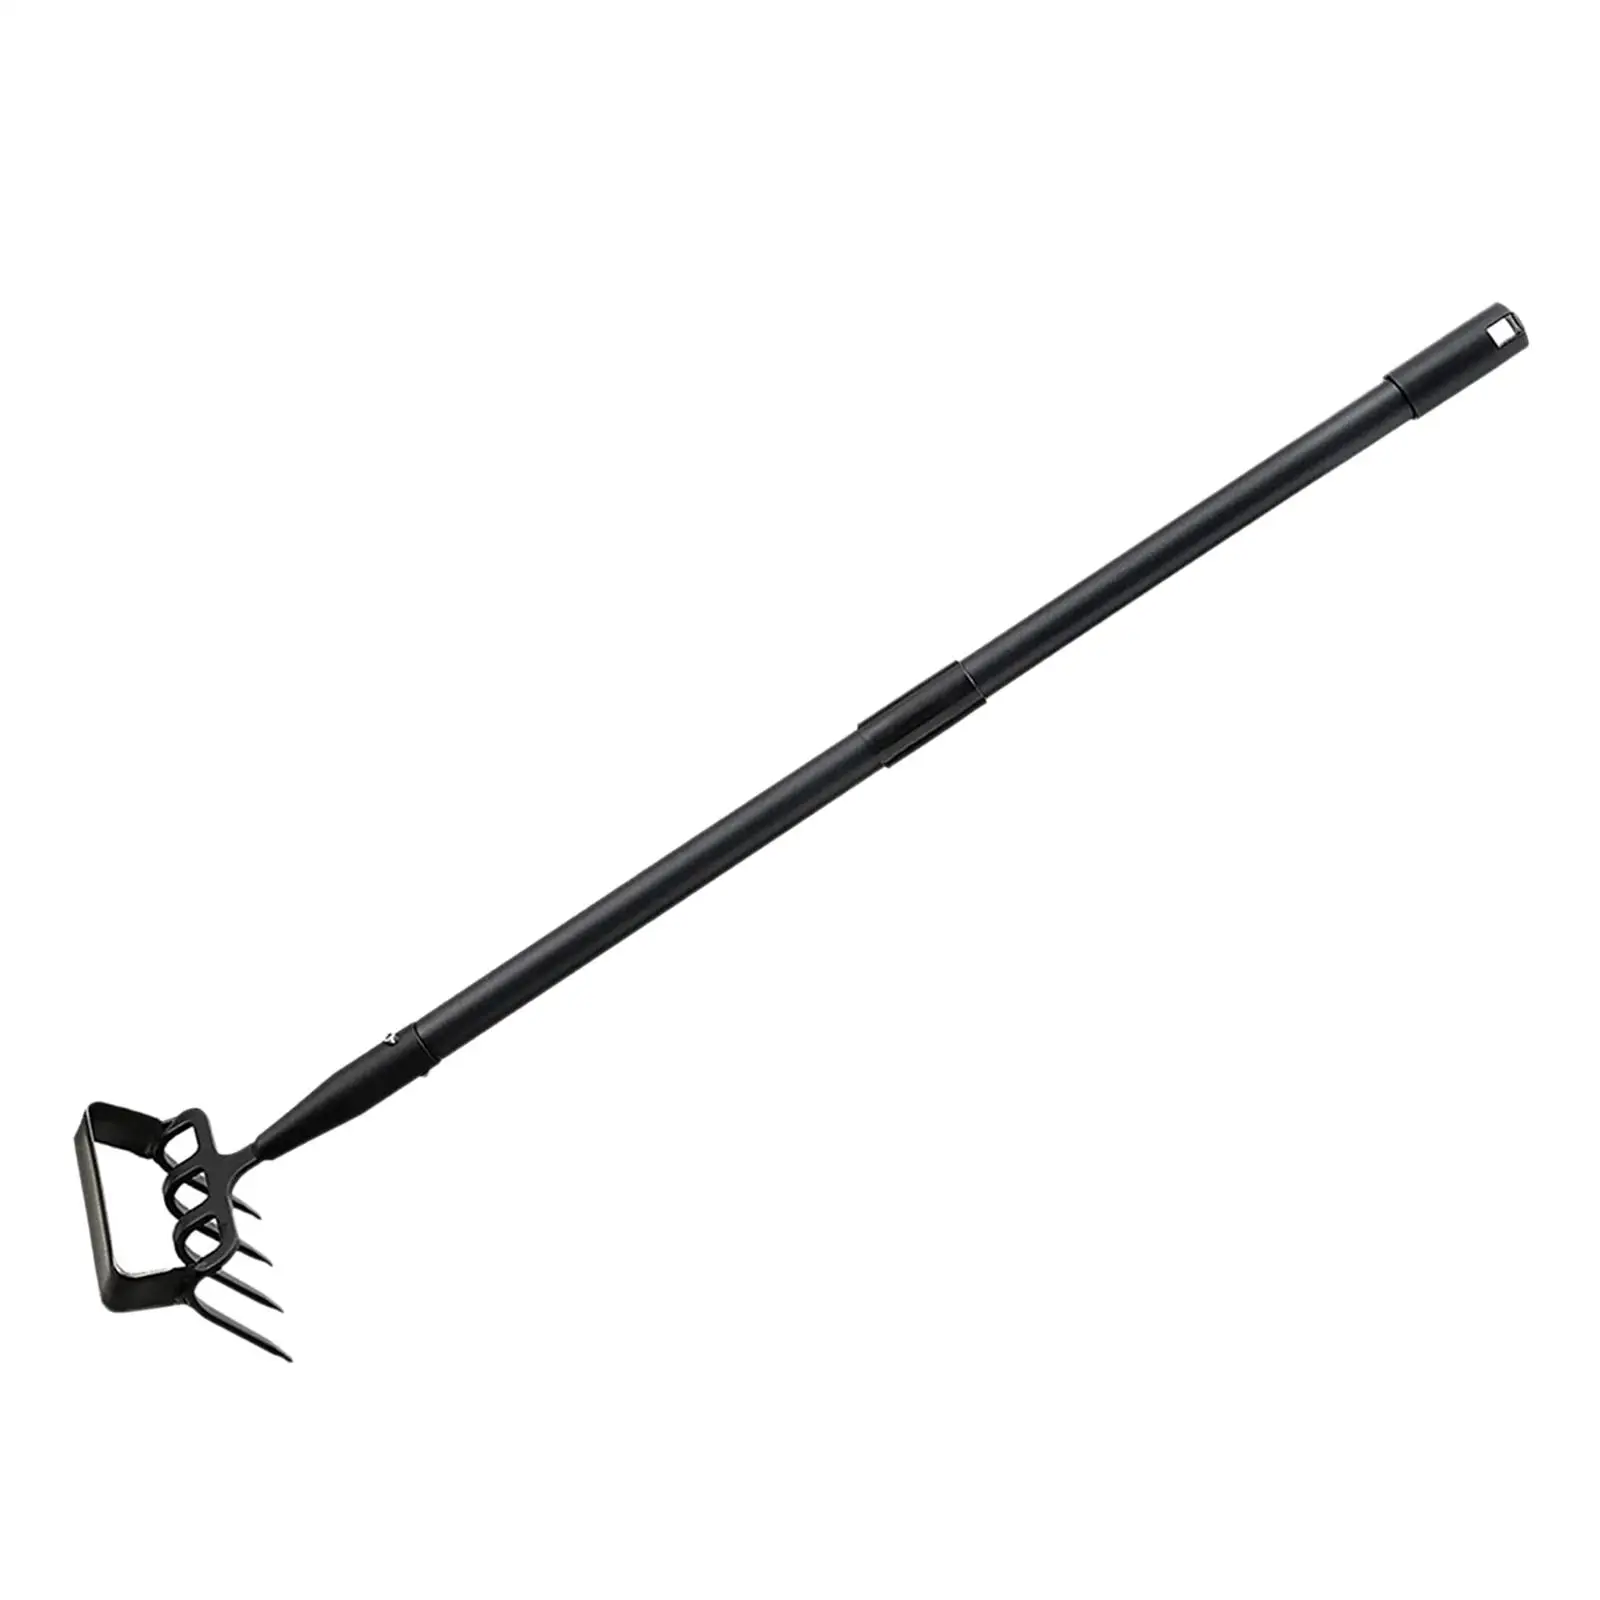 Stirrup Hoe and Cultivator Lightweight Heavy Duty with Long Handle Garden Weeder Hand Tool for Plowing Vegetable Gardening Lawn